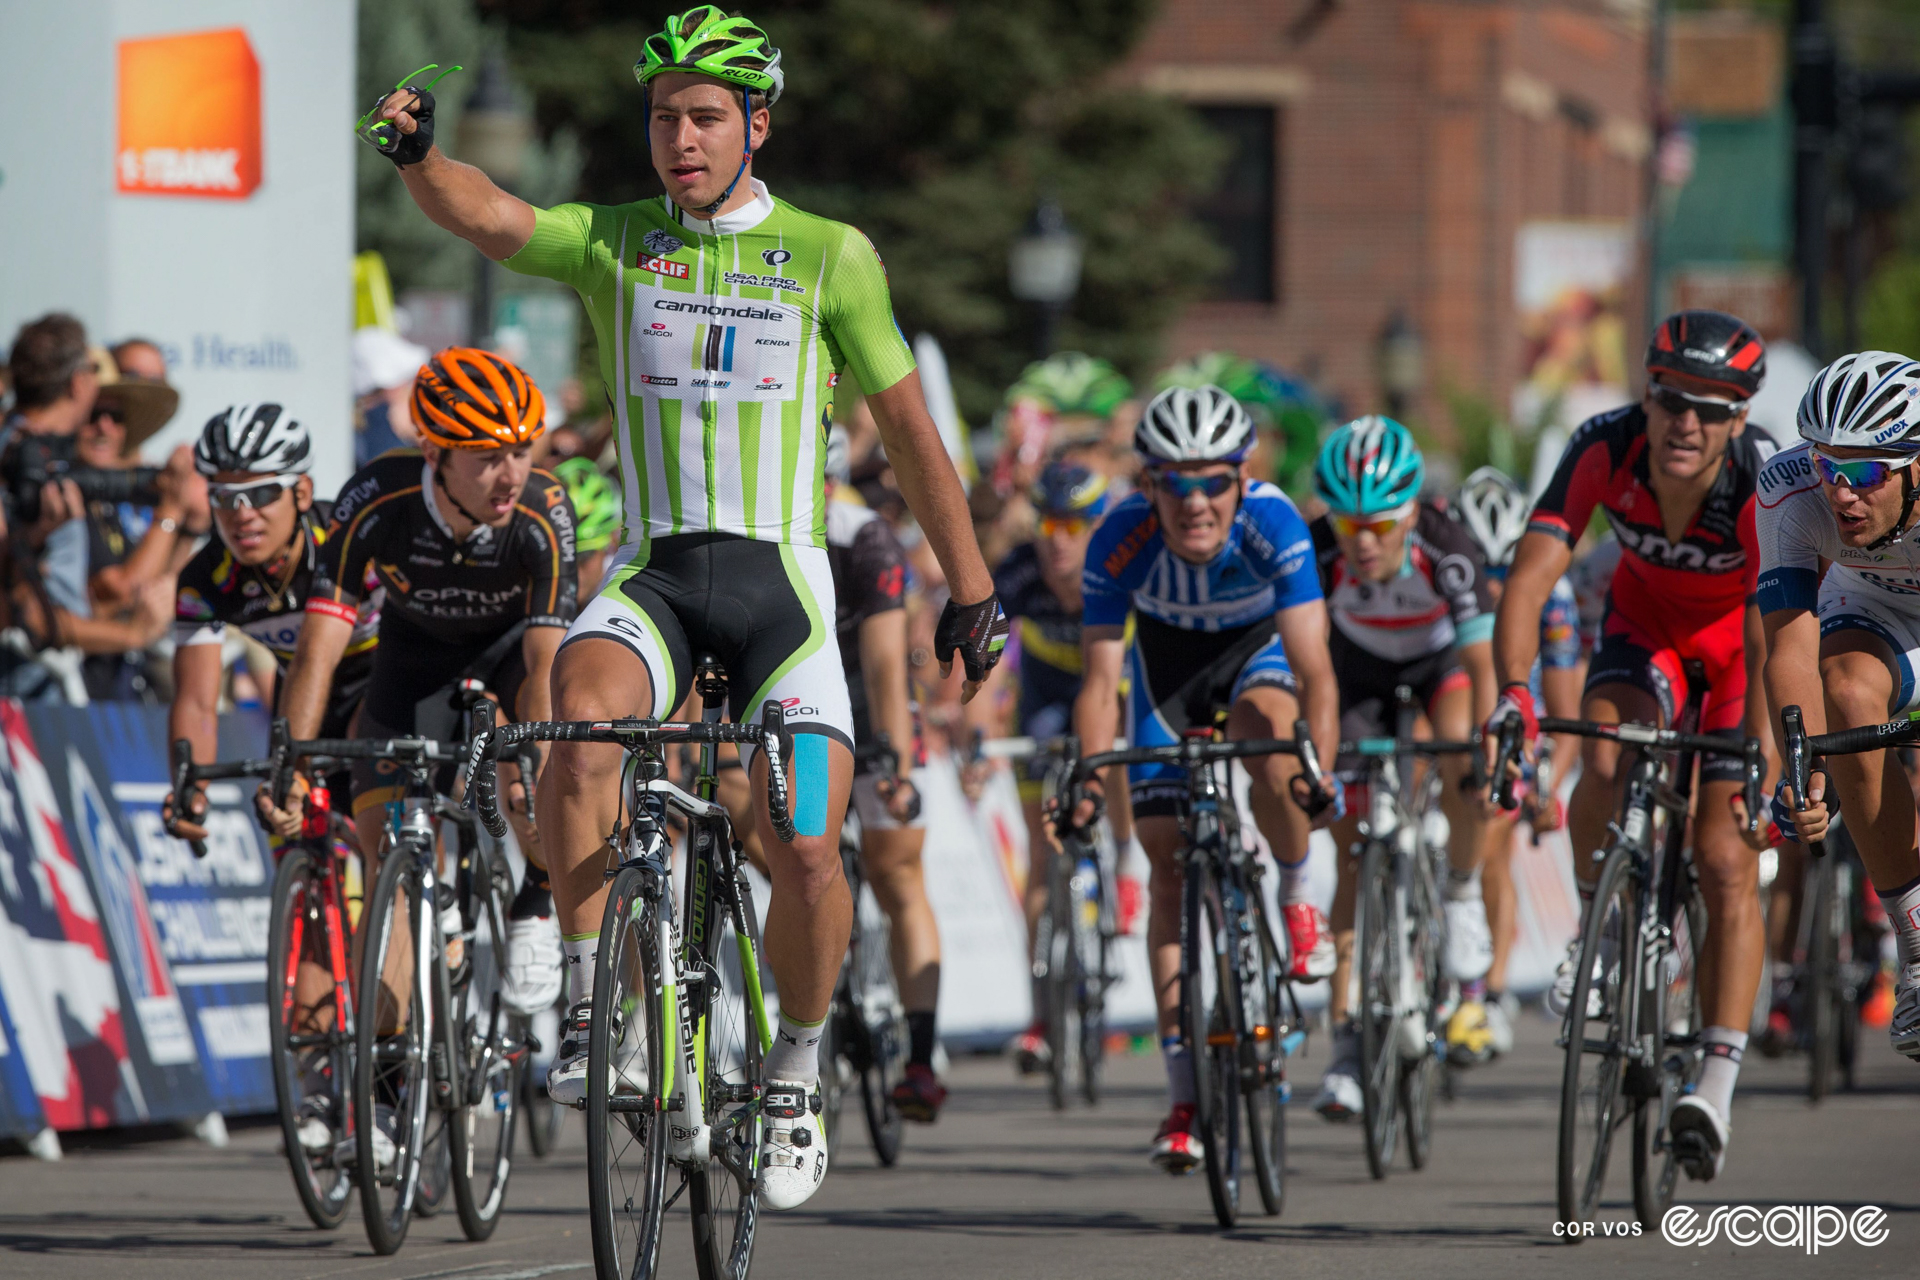 Peter Sagan celebrates winning a stage at the 2013 USA Pro Challenge, taking his sunglasses off in the process.